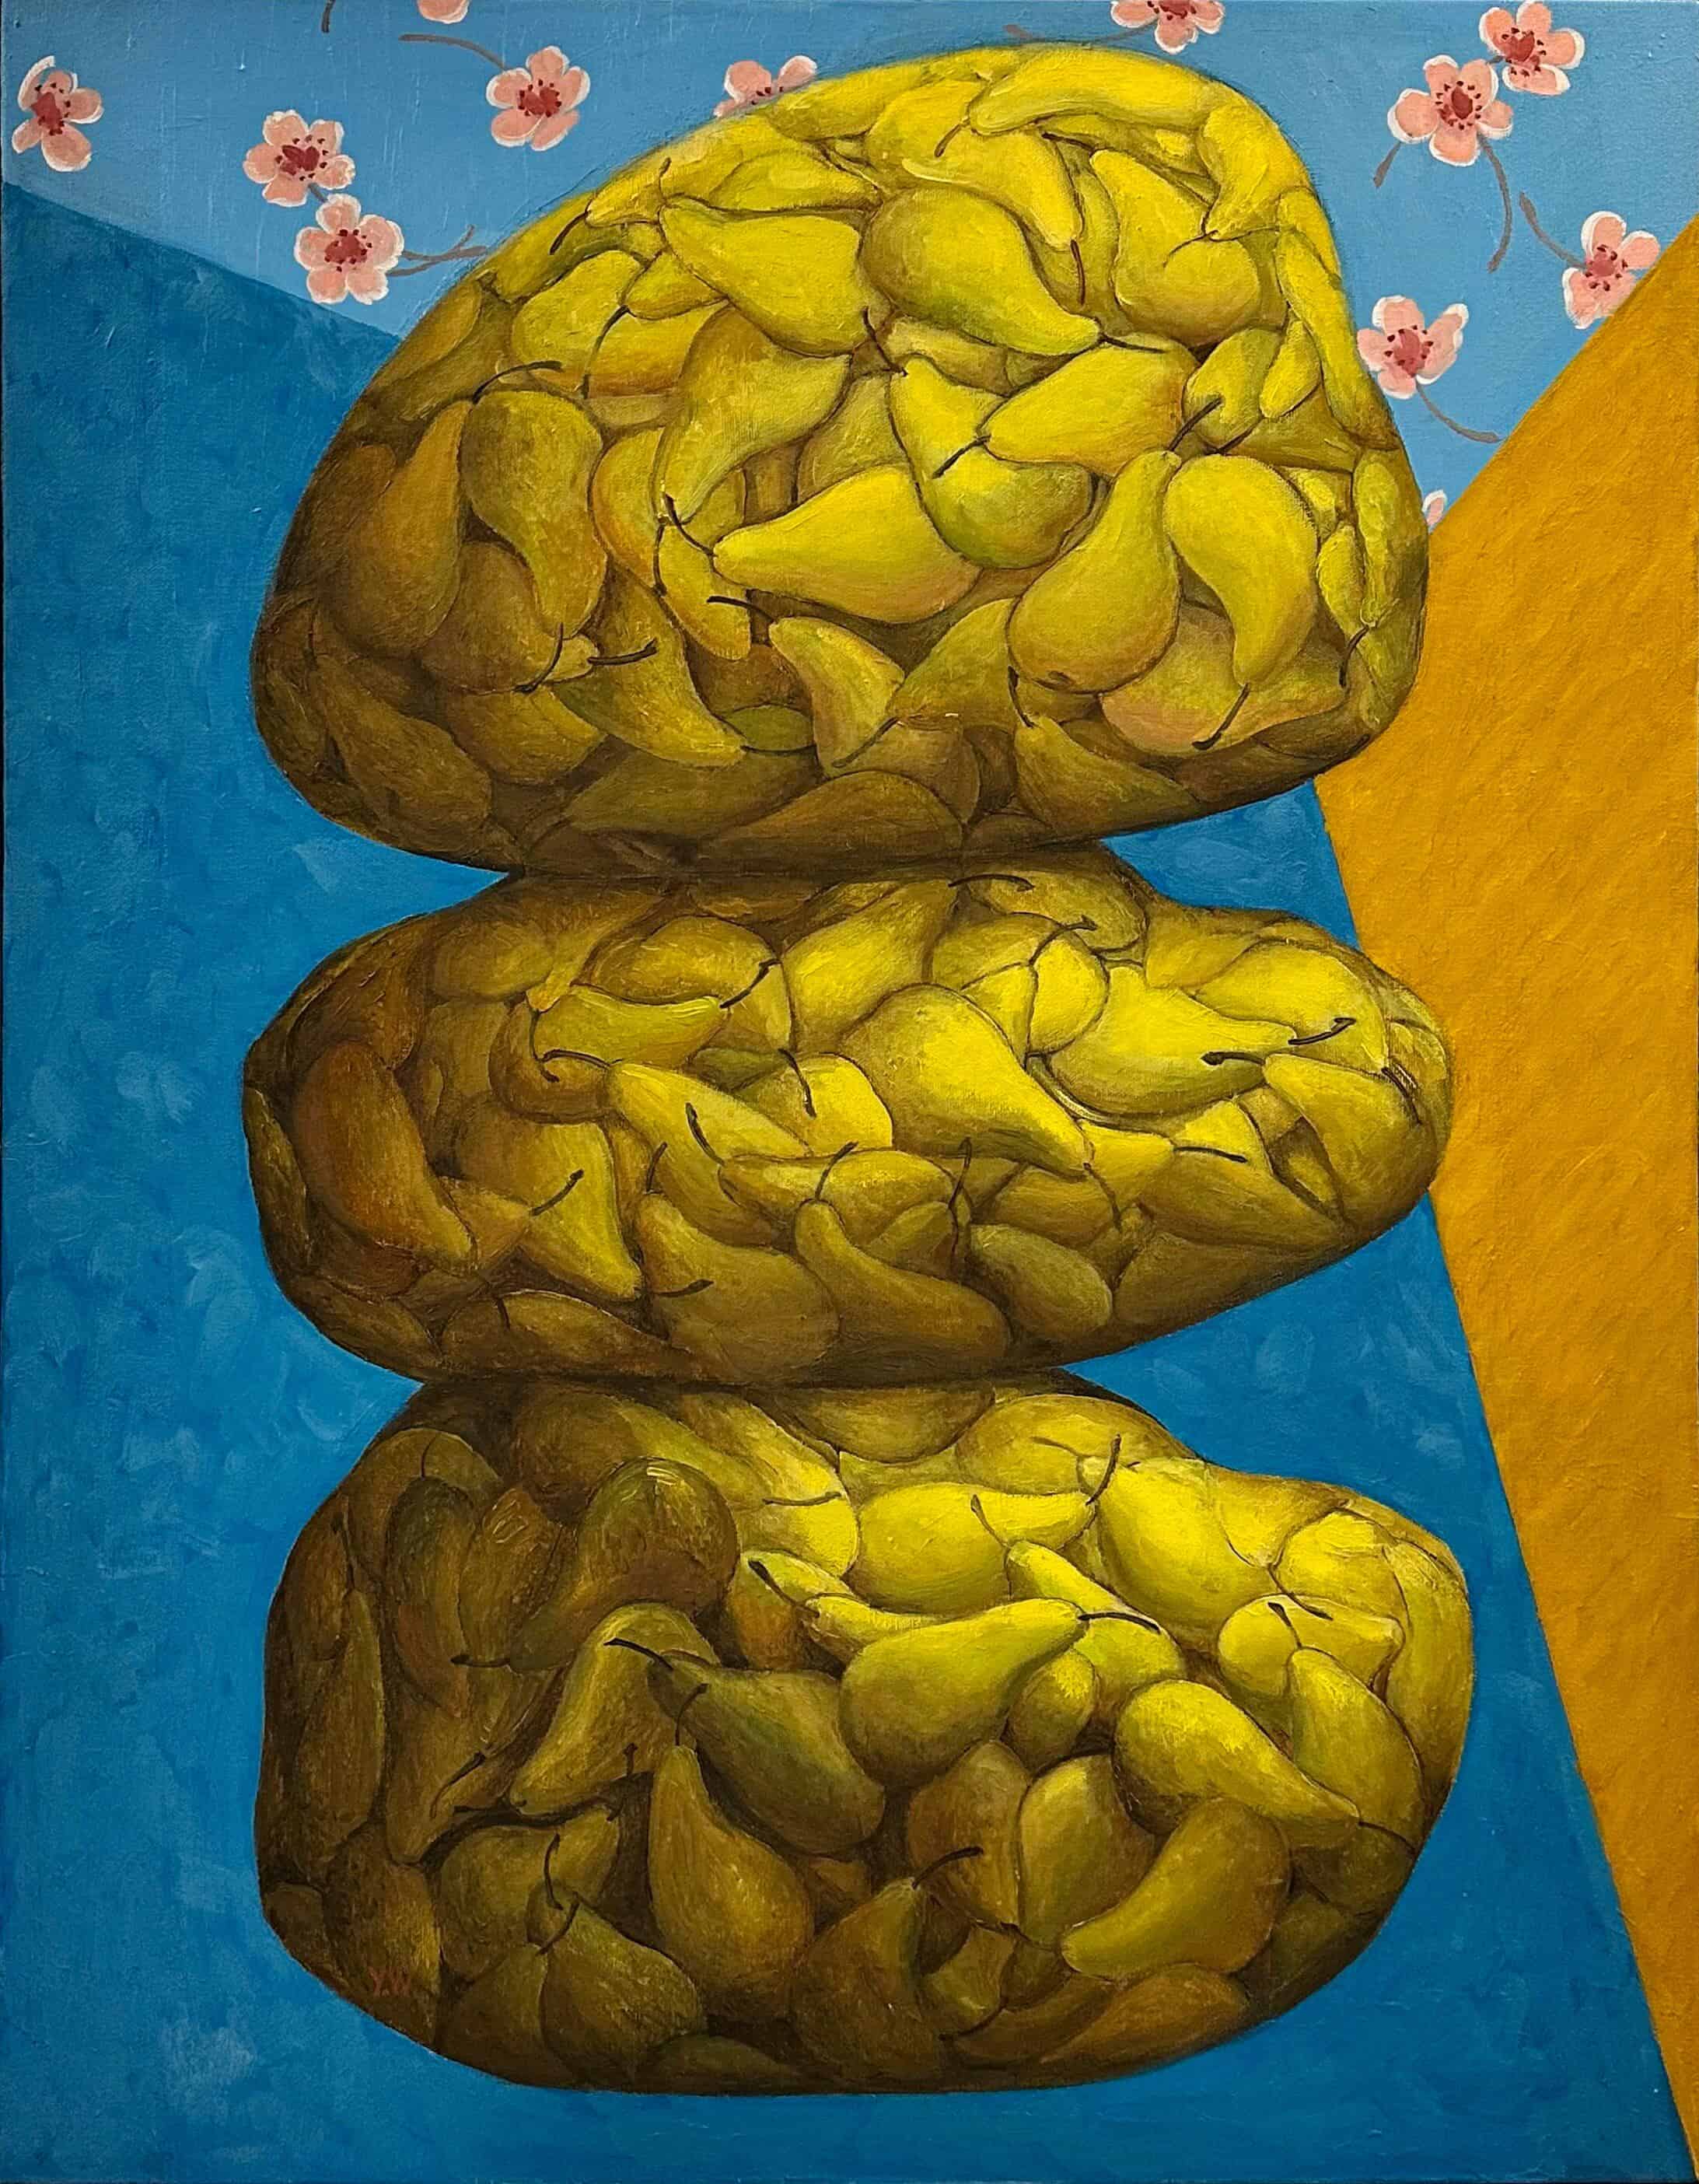 Contemporary Art. Title: Pear & Stone, Oil on Canvas, 30 x 23 inches by Canadian artist Wu Yang.